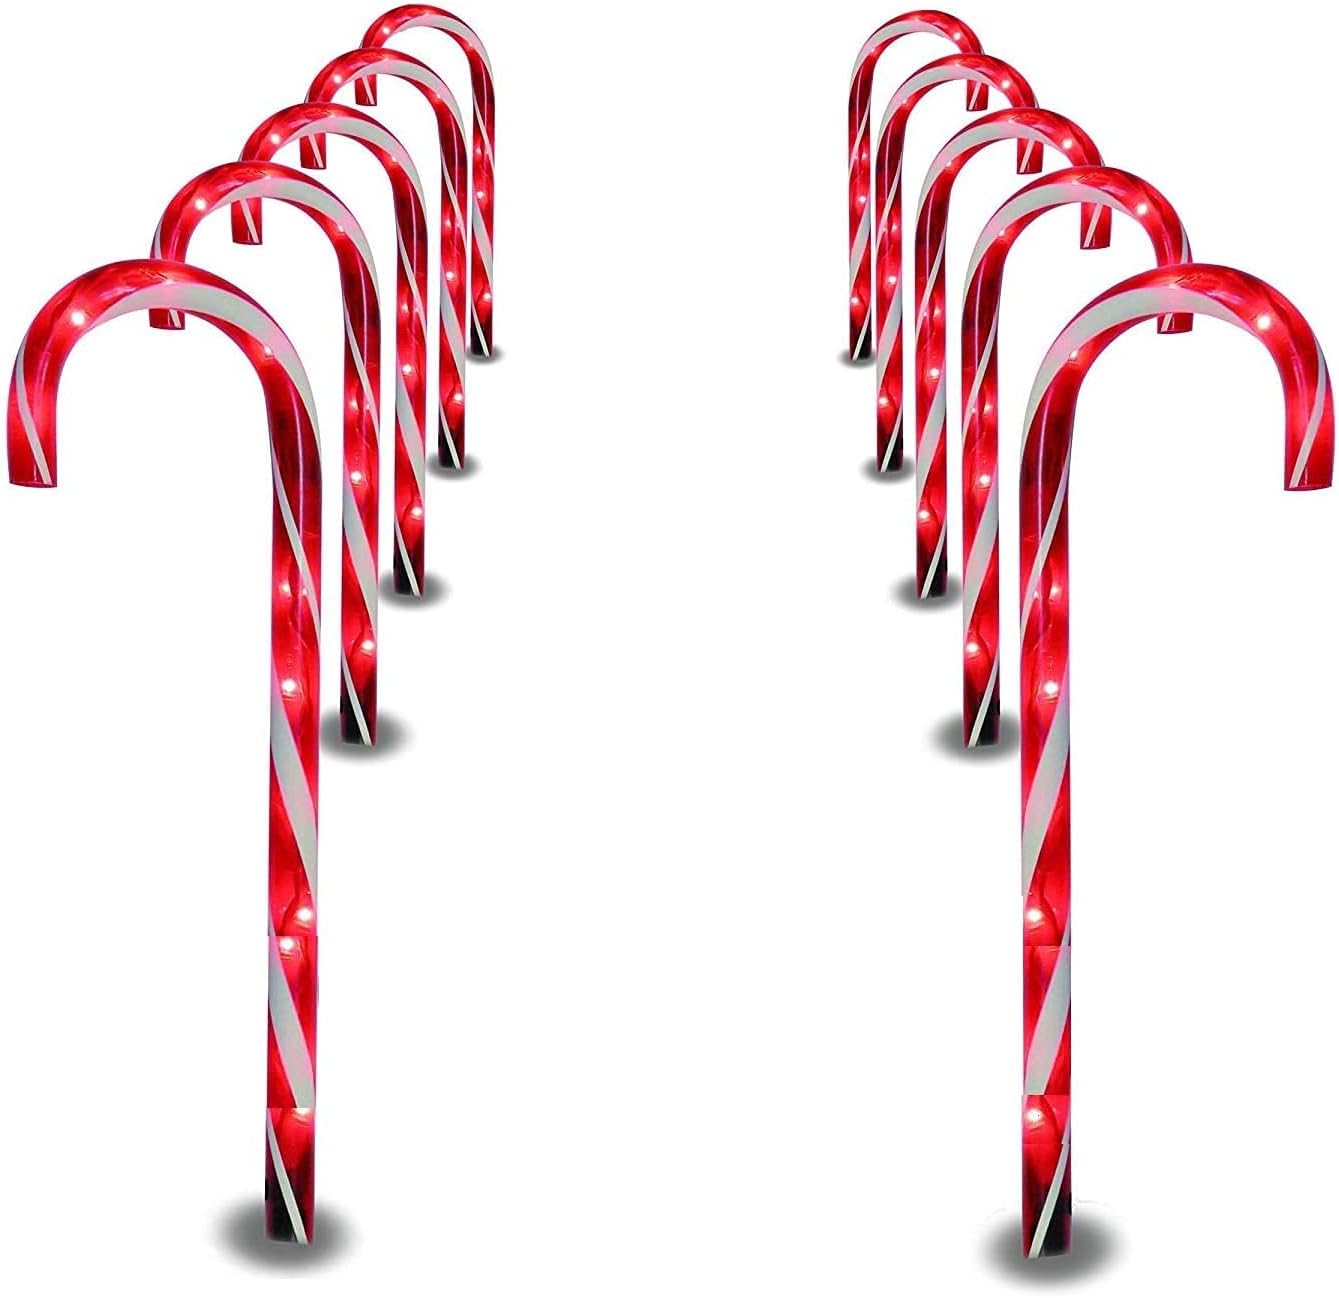 Prextex 10 Christmas Candy Cane Pathway Lights Markers for Indoor and Outdoor Use - Christmas Light Up Candy Cane Walkway Outside (2 Se